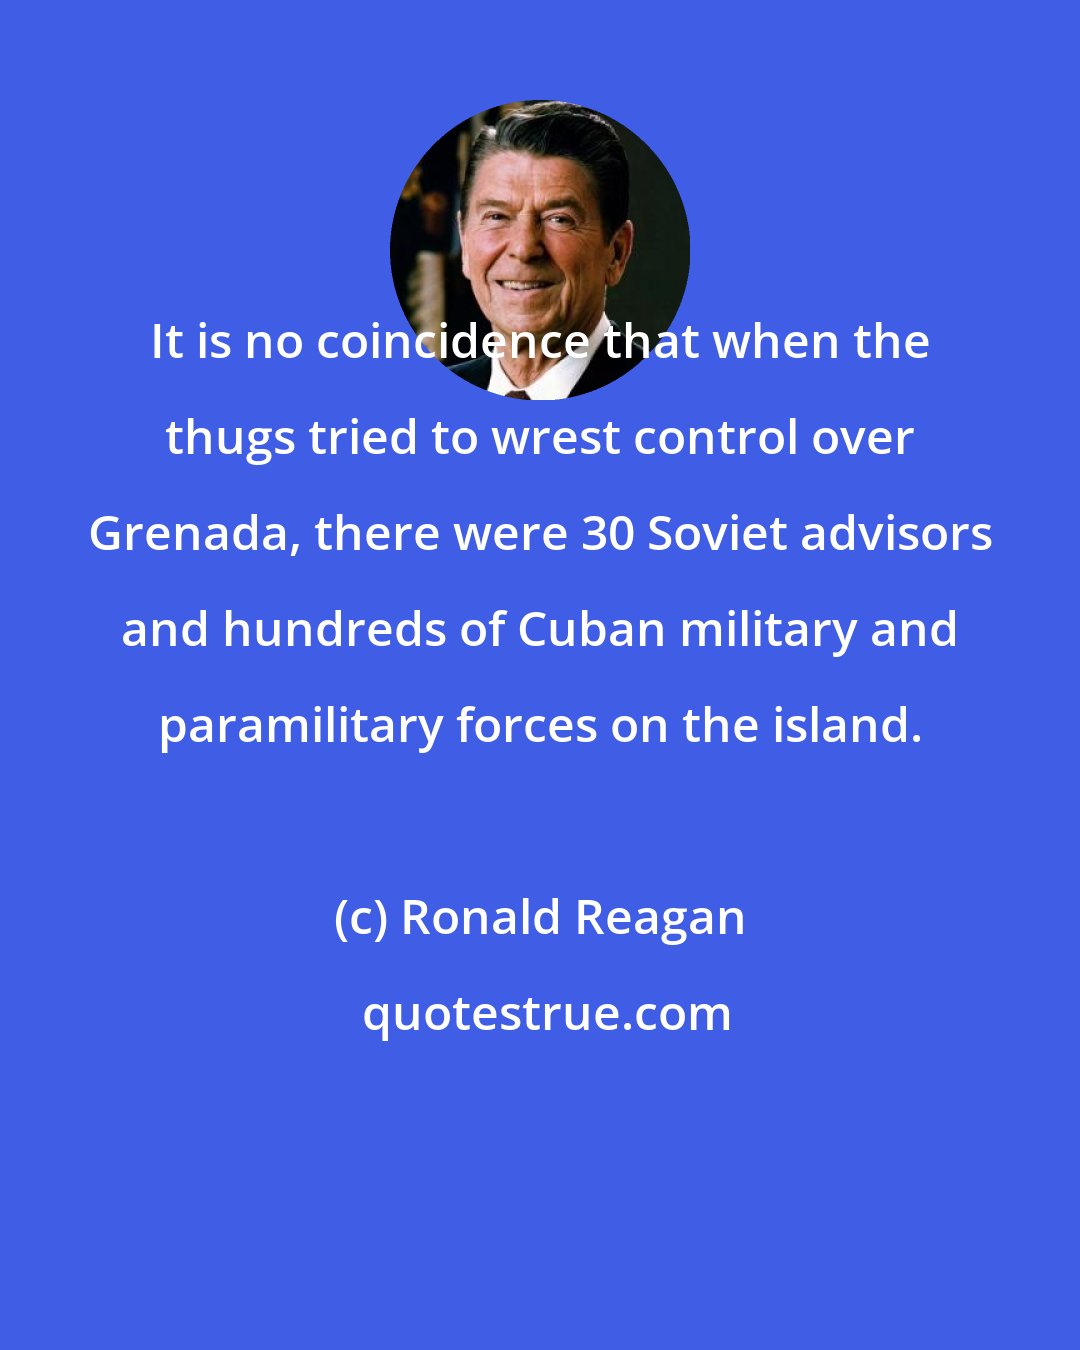 Ronald Reagan: It is no coincidence that when the thugs tried to wrest control over Grenada, there were 30 Soviet advisors and hundreds of Cuban military and paramilitary forces on the island.